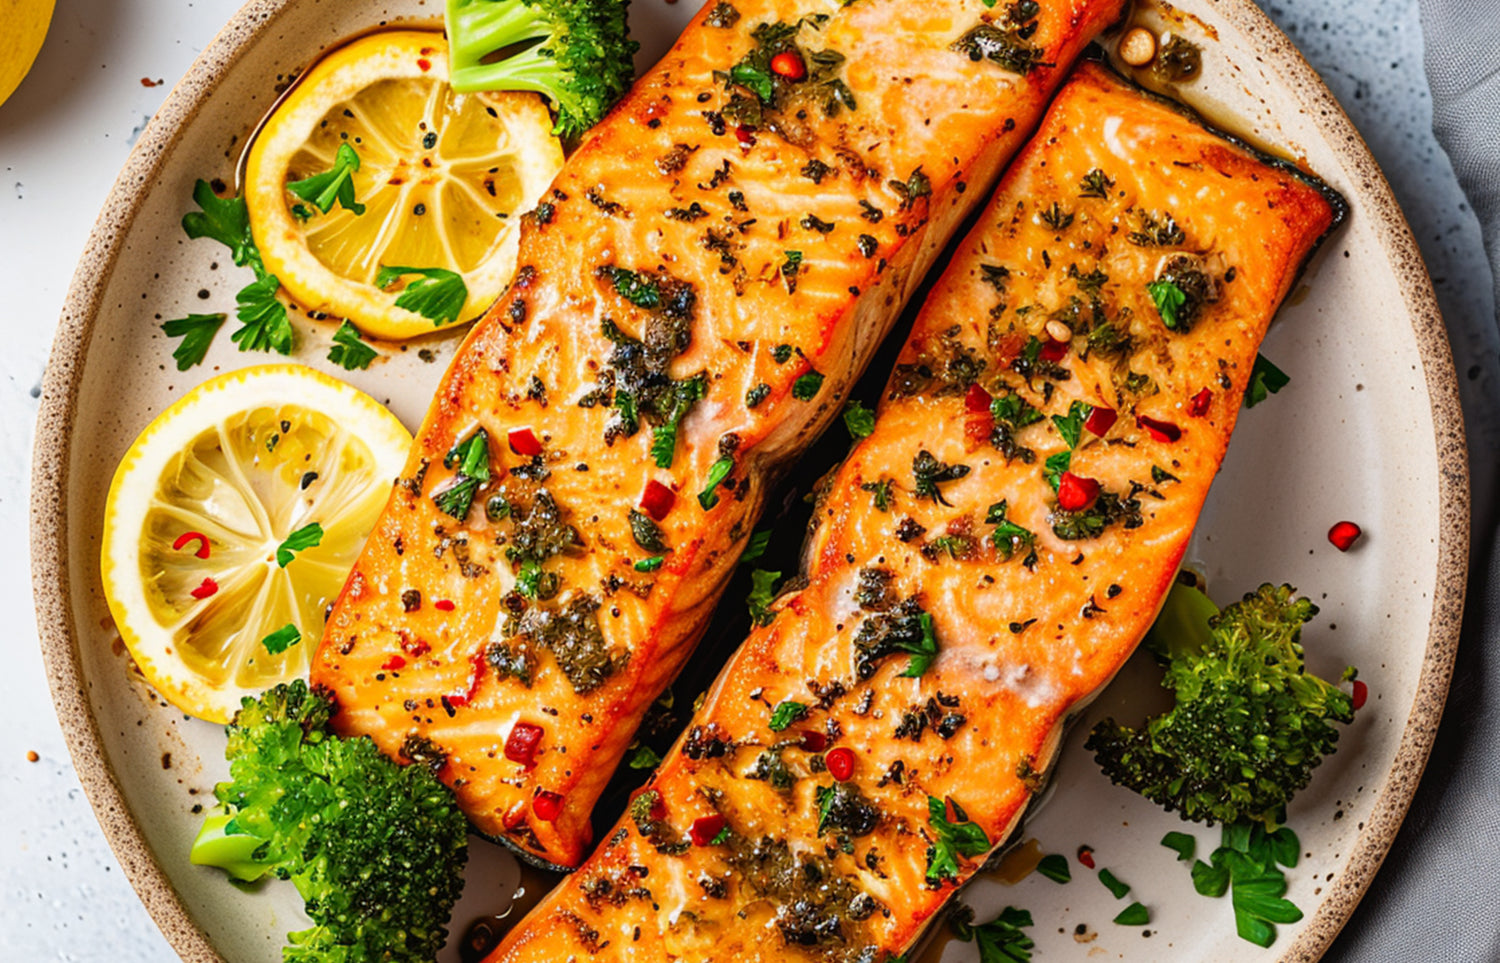 Grilled salmon fillets with lemon and herbs, cooked to perfection by Ruokala